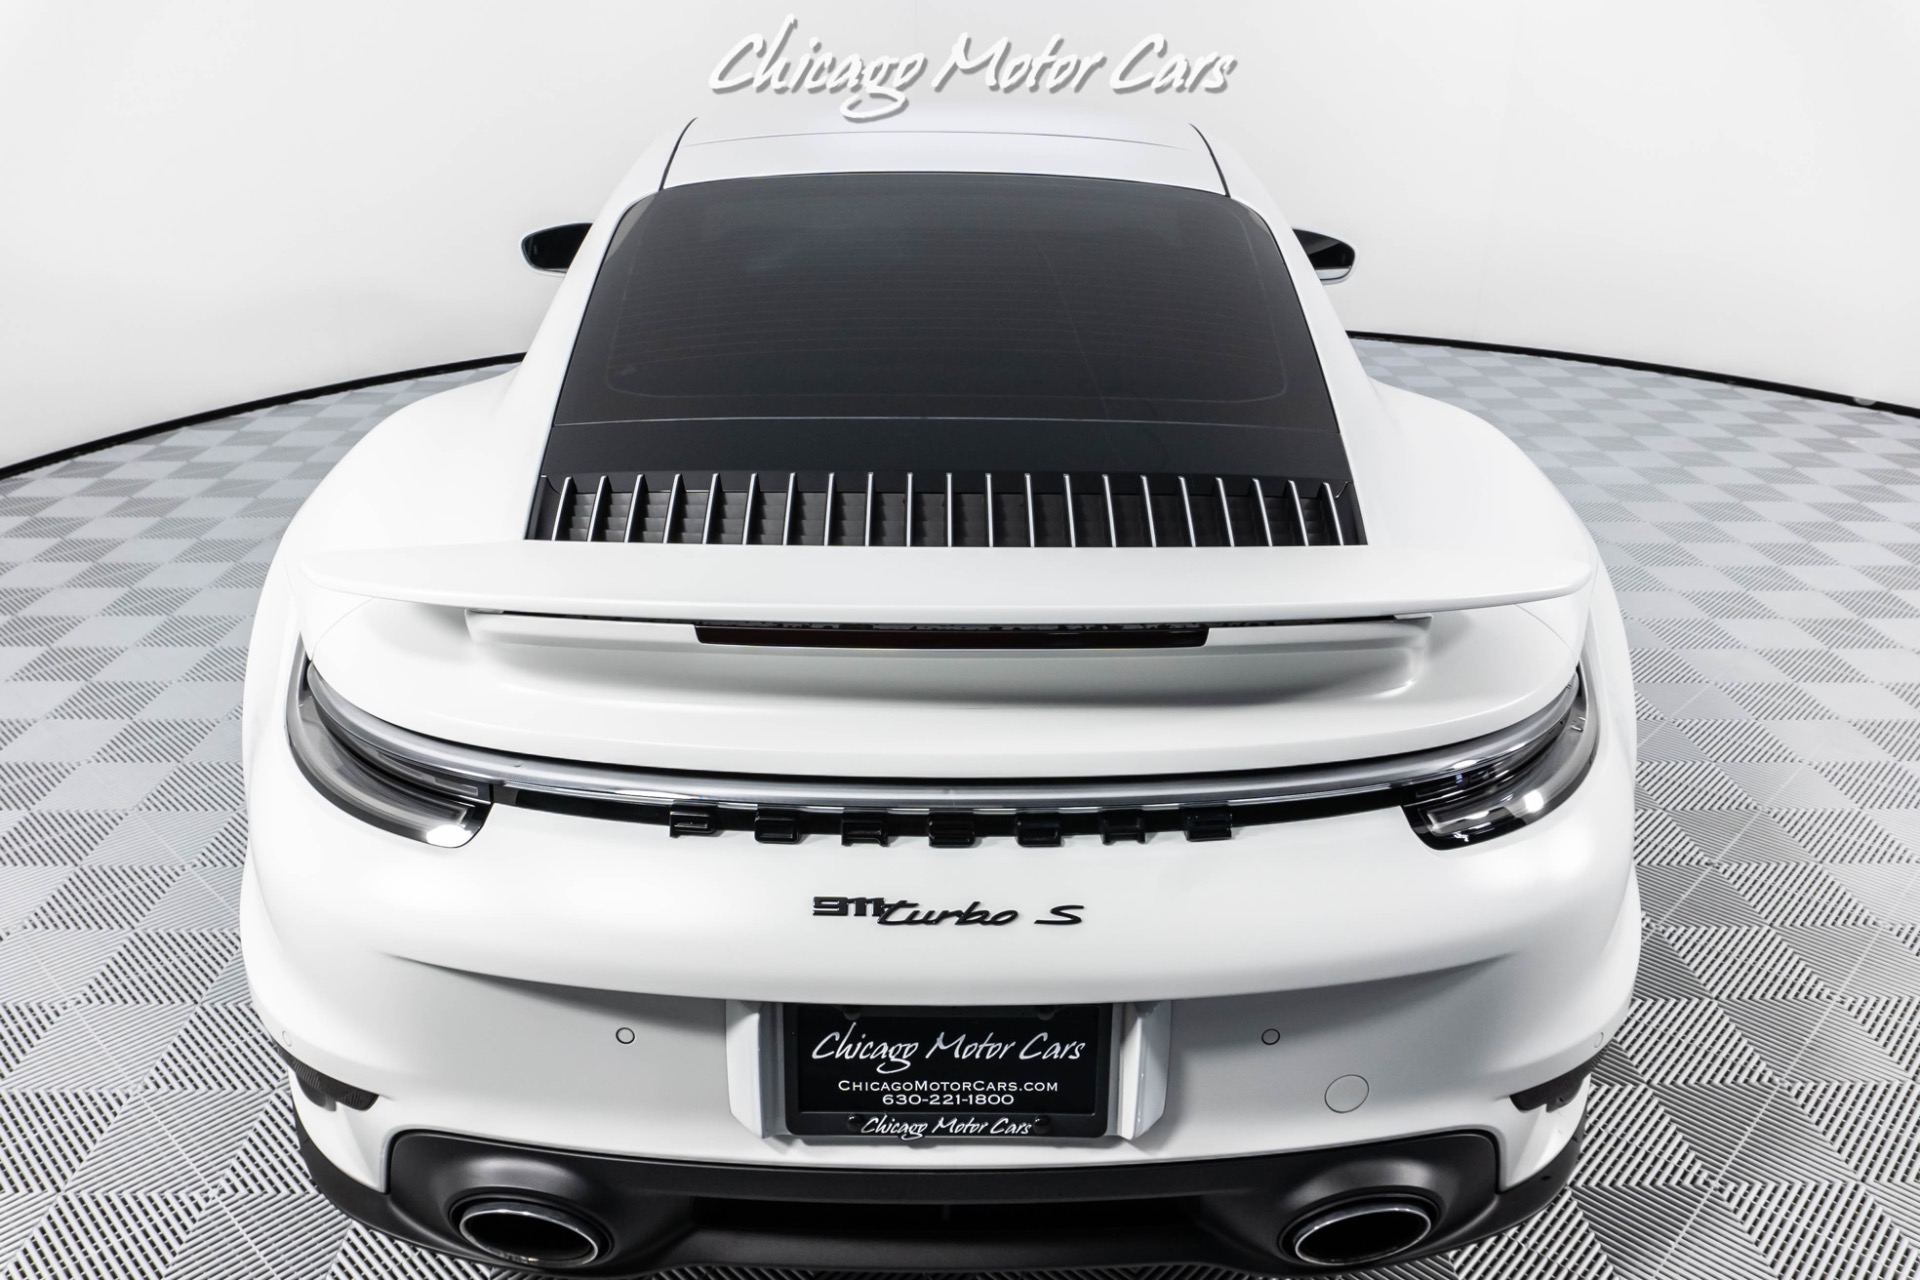 Used-2021-Porsche-911-Turbo-S-Only-9k-Miles-XPEL-STEALTH-PPF-Front-Lift-Sport-Exhaust